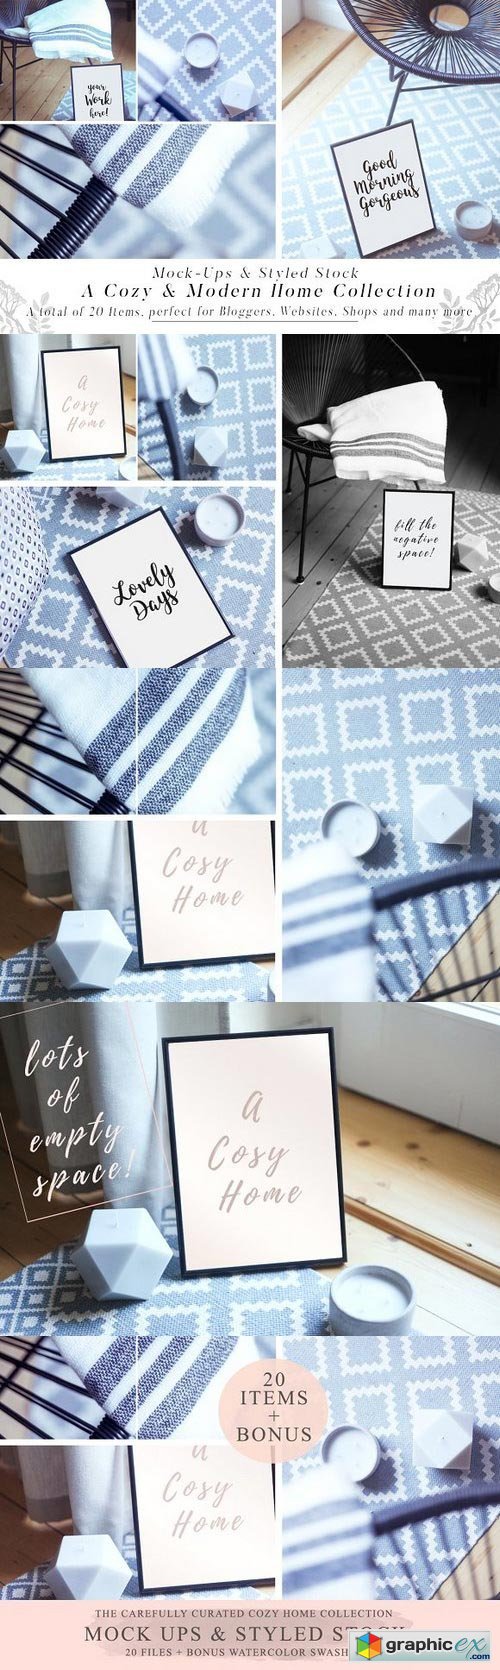 20 Cozy Home Mock Ups & Styled Stock